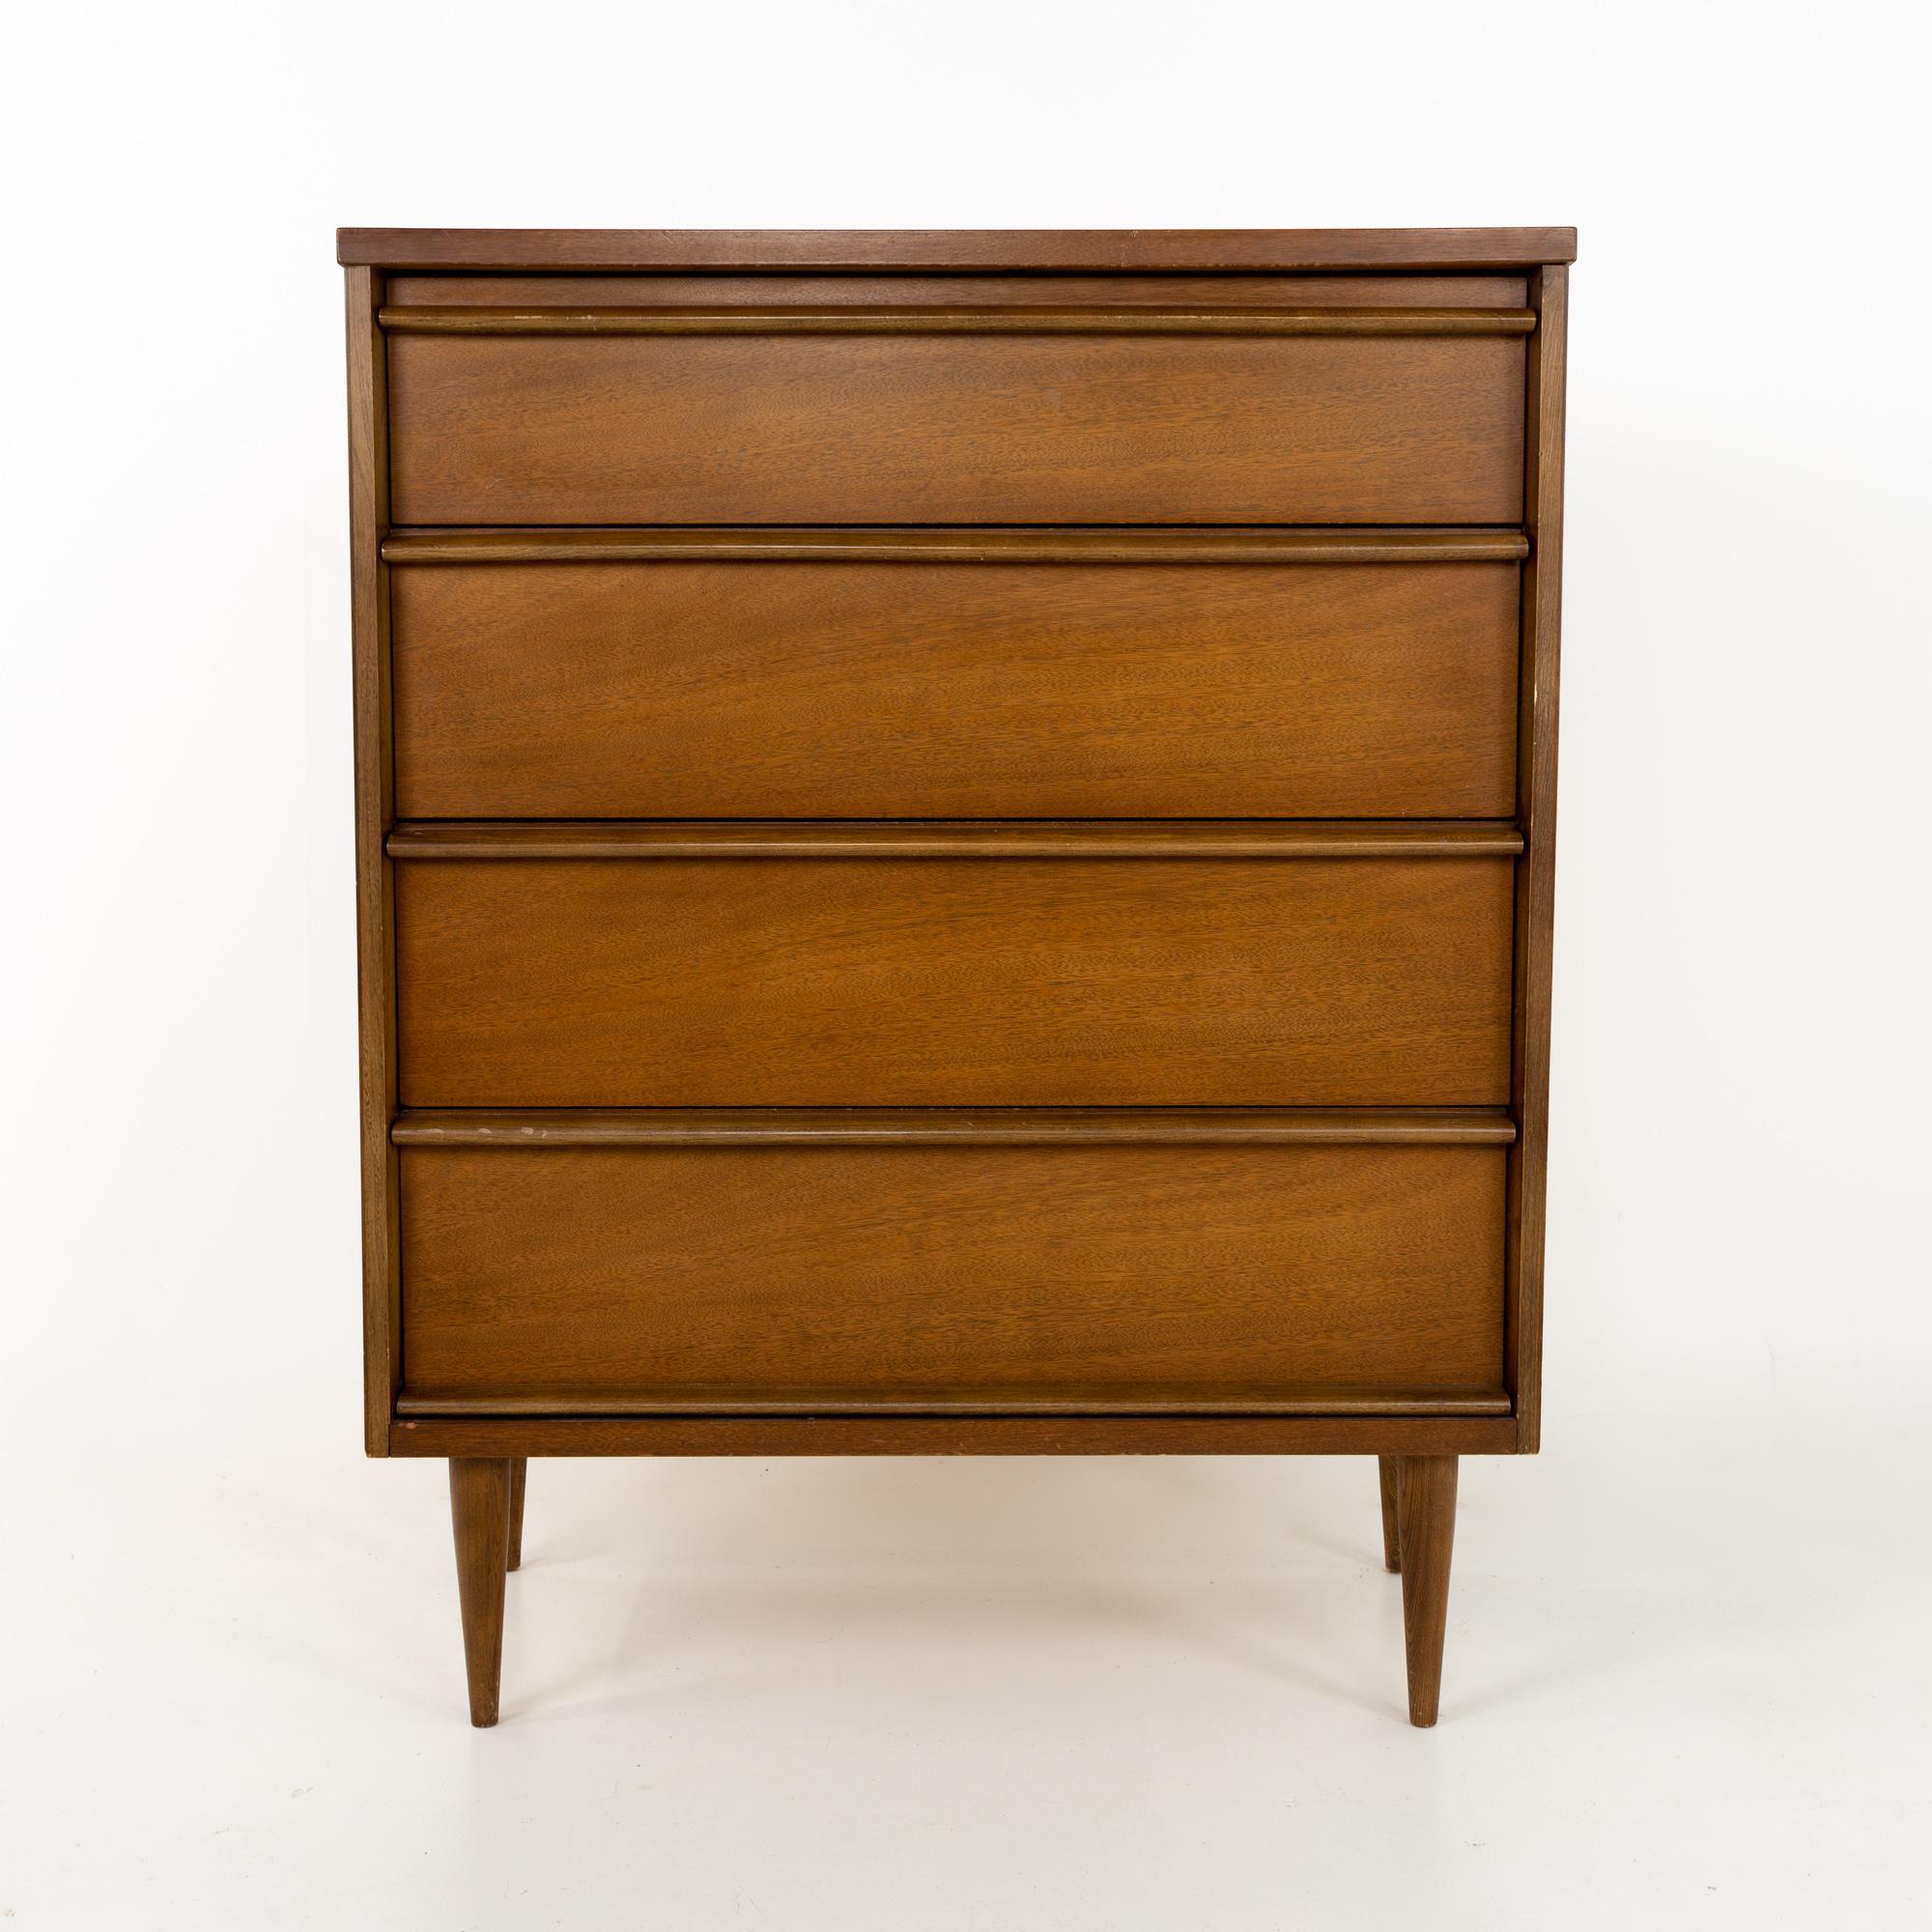 Paul McCobb style Bassett Mid Century walnut 4 drawer highboy dresser
This dresser is 34 wide x 18 deep x 43.5 inches high

This price includes getting this piece in what we call restored vintage condition. That means the piece is permanently fixed